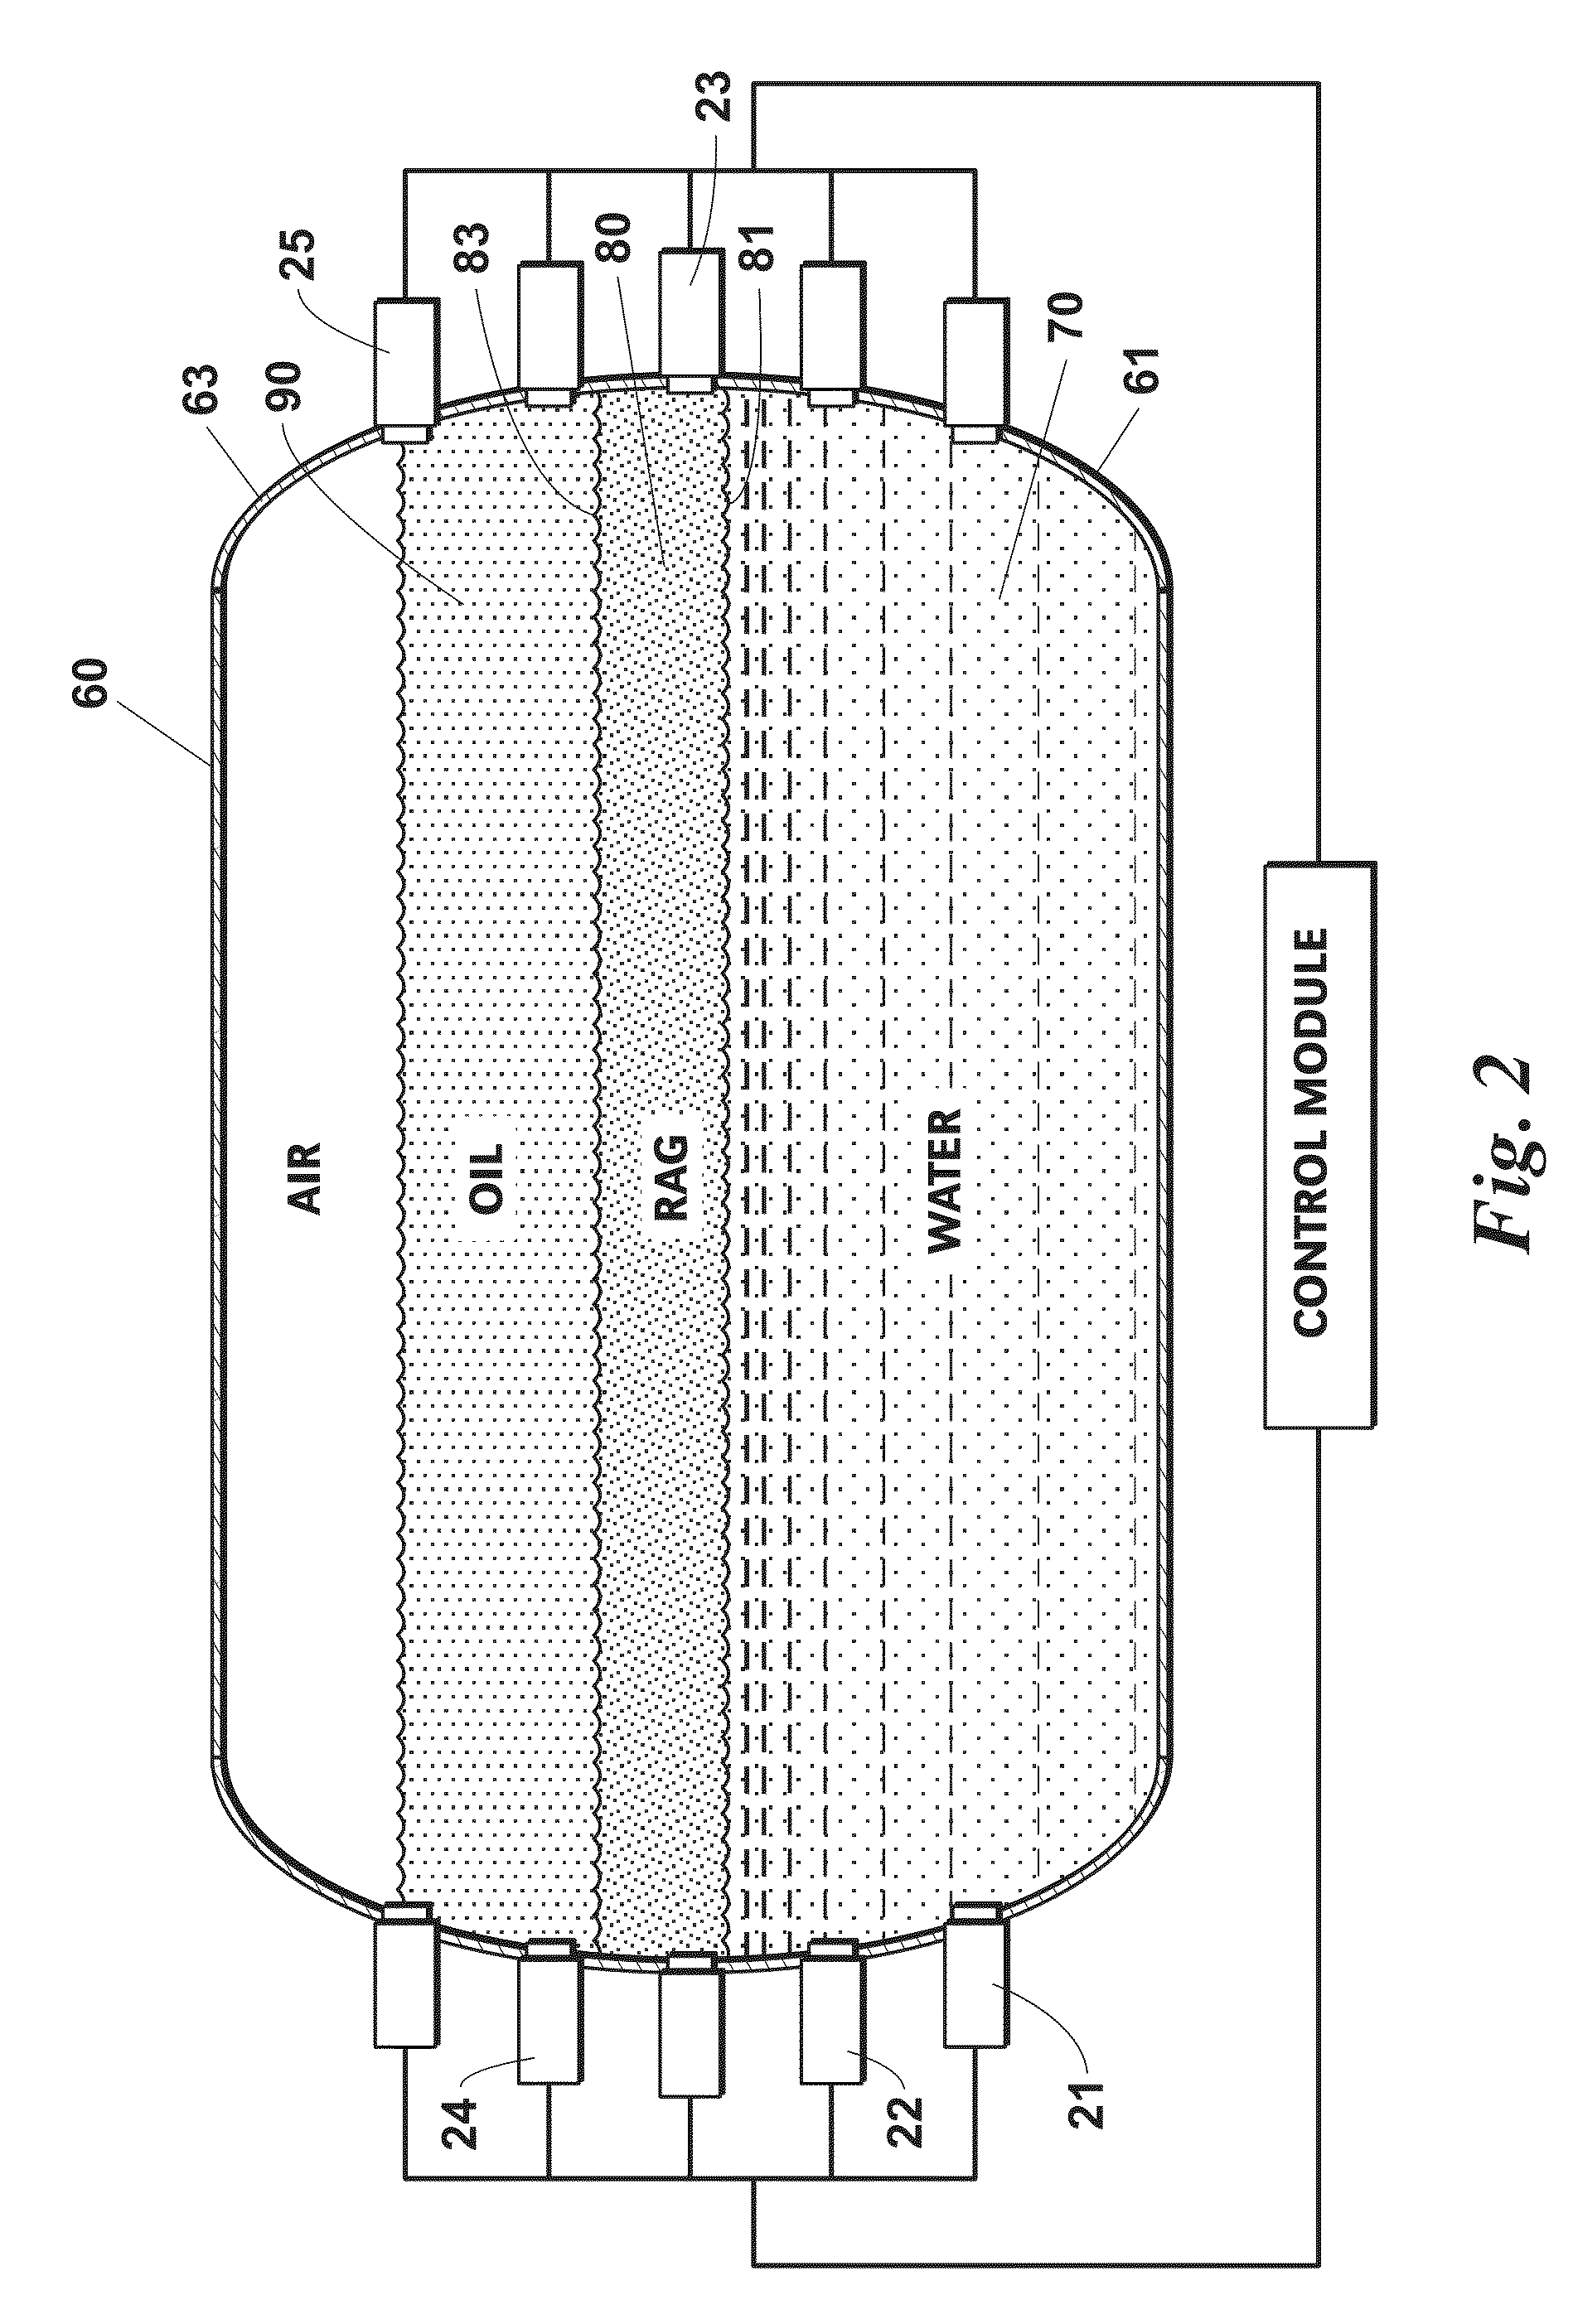 Ultrasonic Rag Layer Detection System And Method For Its Use